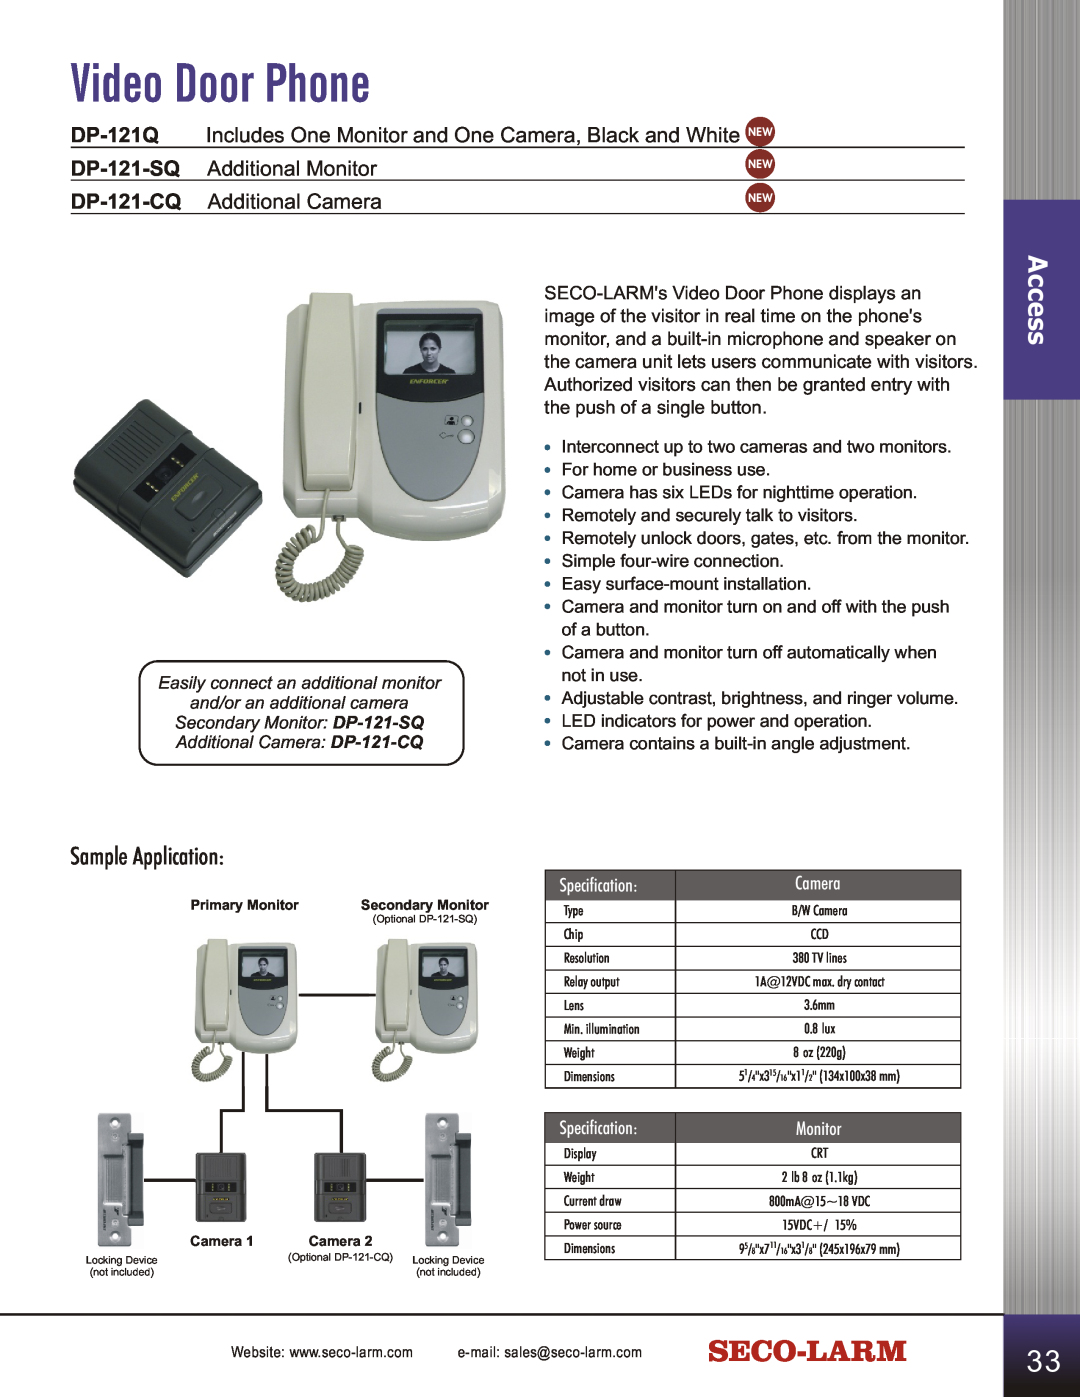 SECO-LARM USA SD-C141S manual Video Door Phone, Sample Application, Access, Specification, Camera, Monitor 